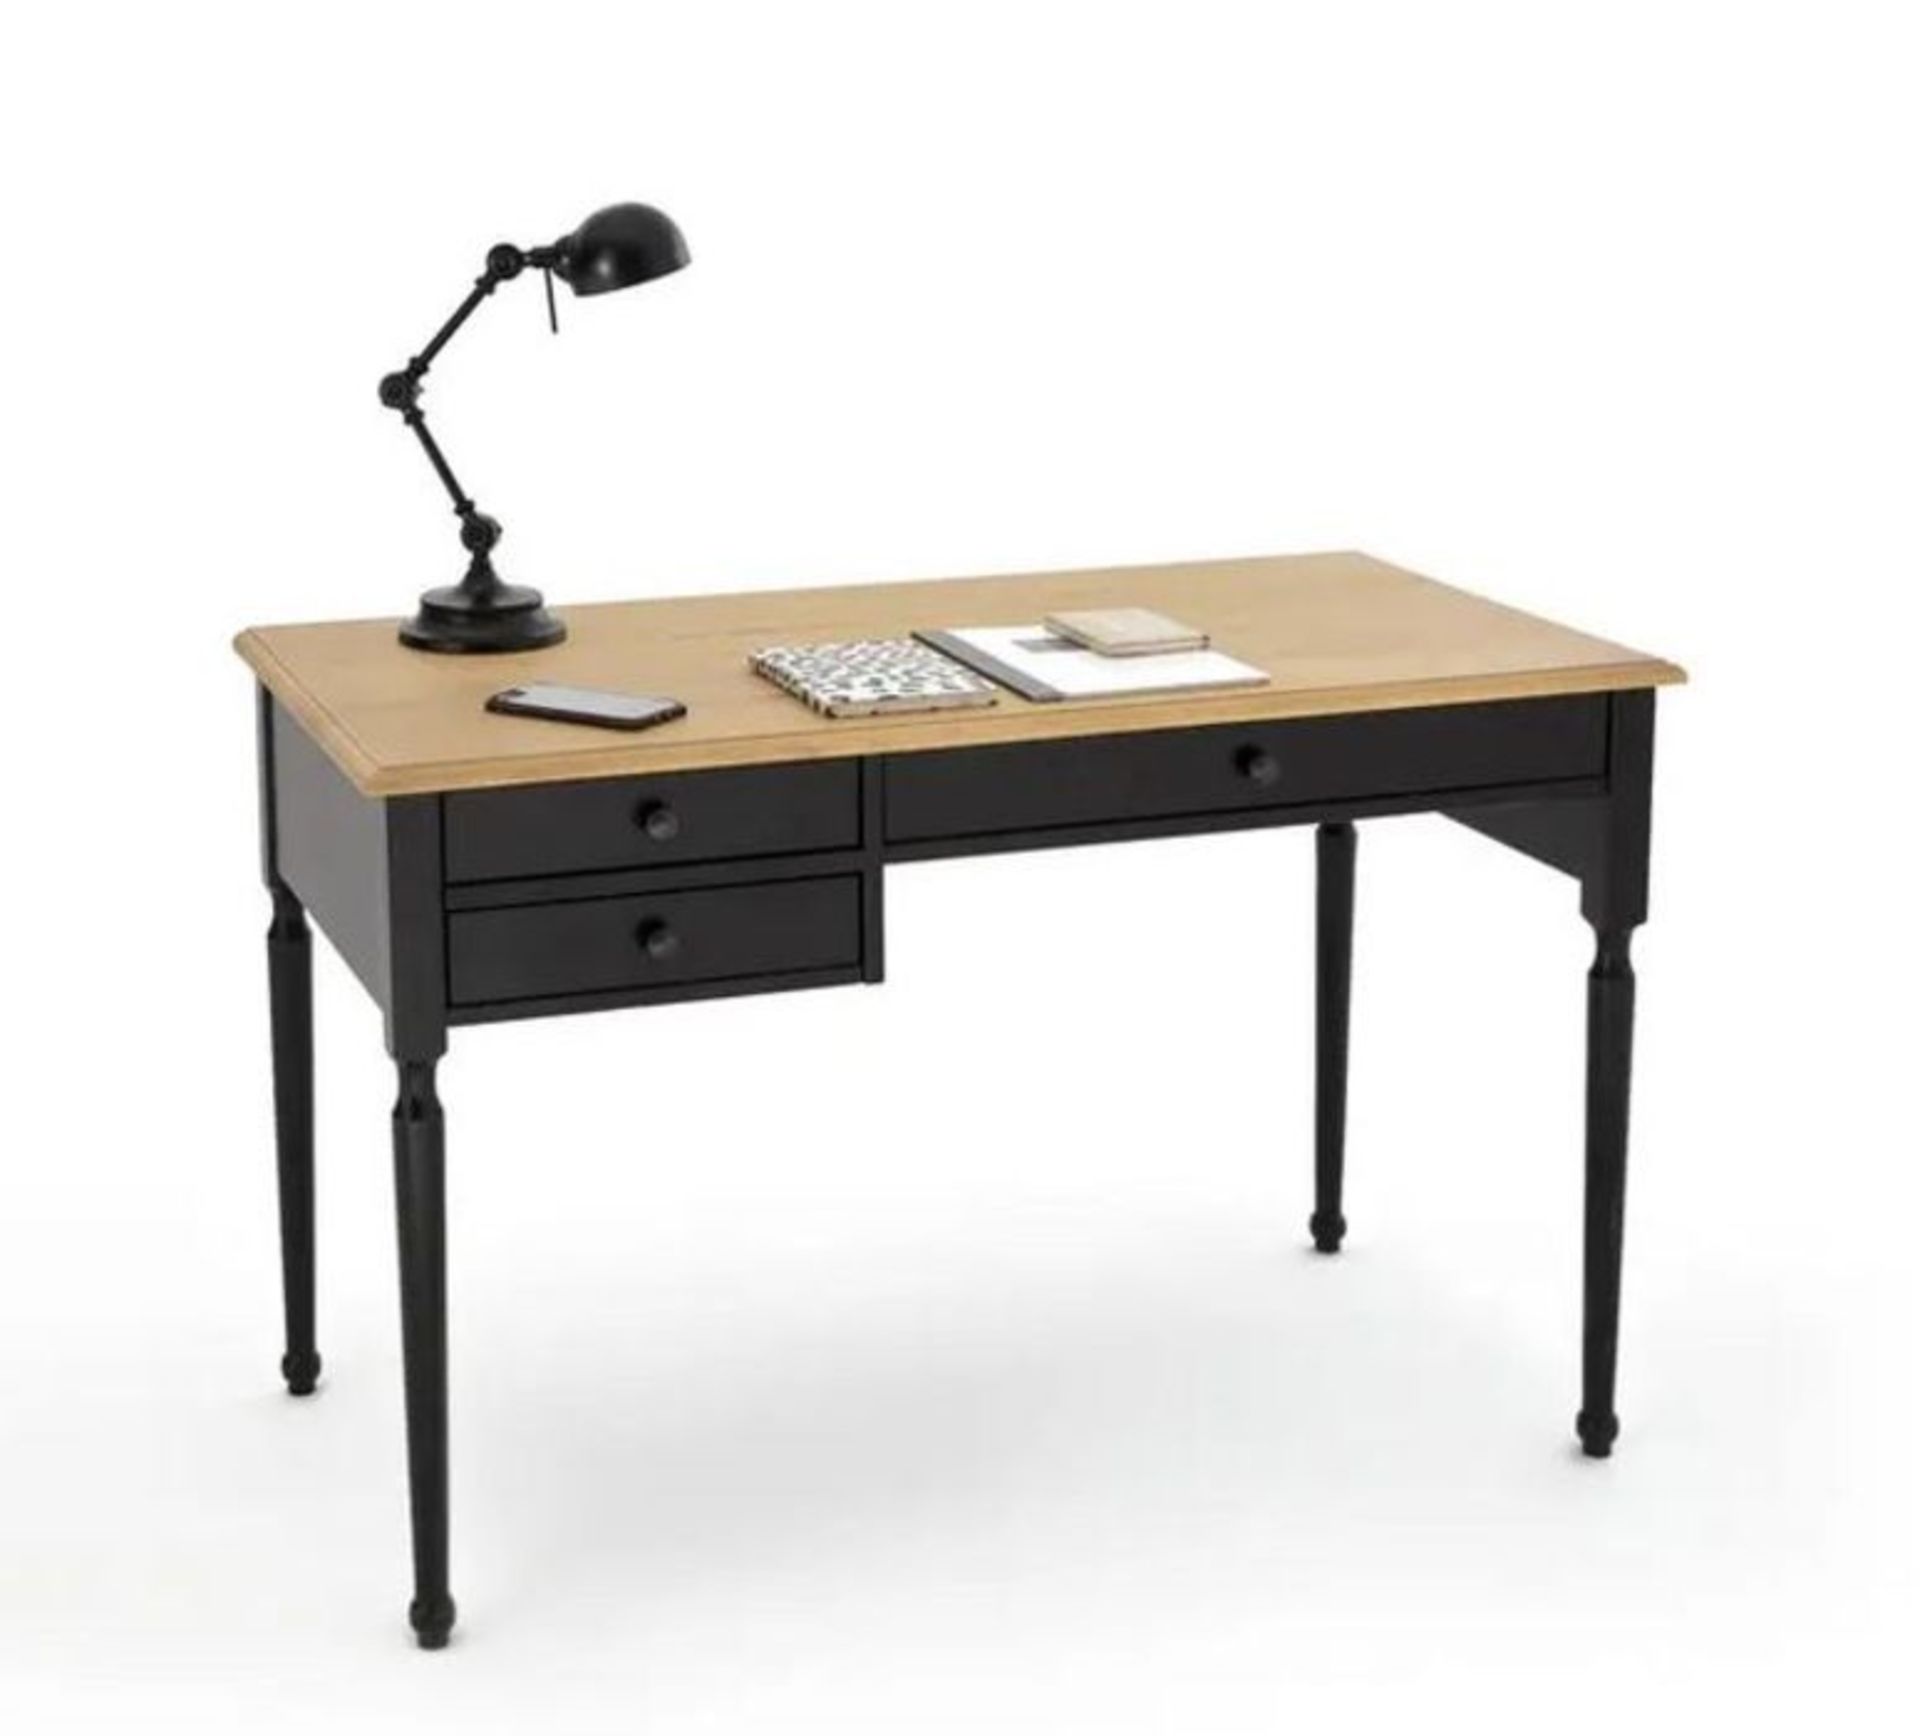 AUTHENTIC STYLE SOLID PINE DESK / RRP £350.00 / CUSTOMER RETURN. GRADE A/B, SIGNS OF LIGHT WEAR